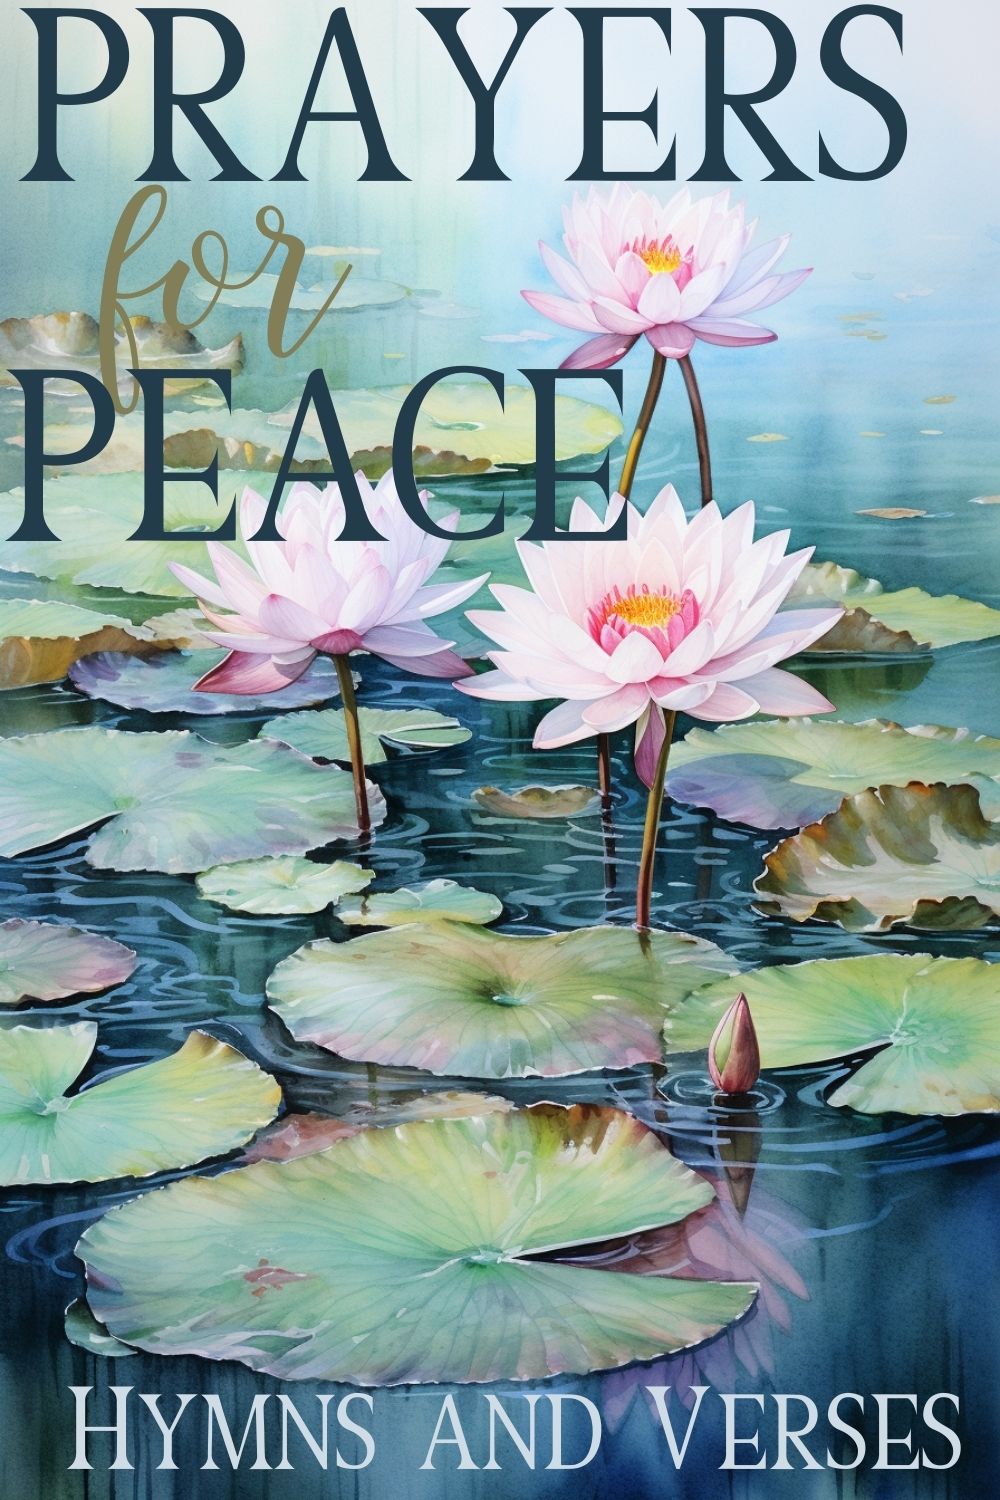 pinterest pin about prayers for peace featuring peaceful pond with lilypads and flowers